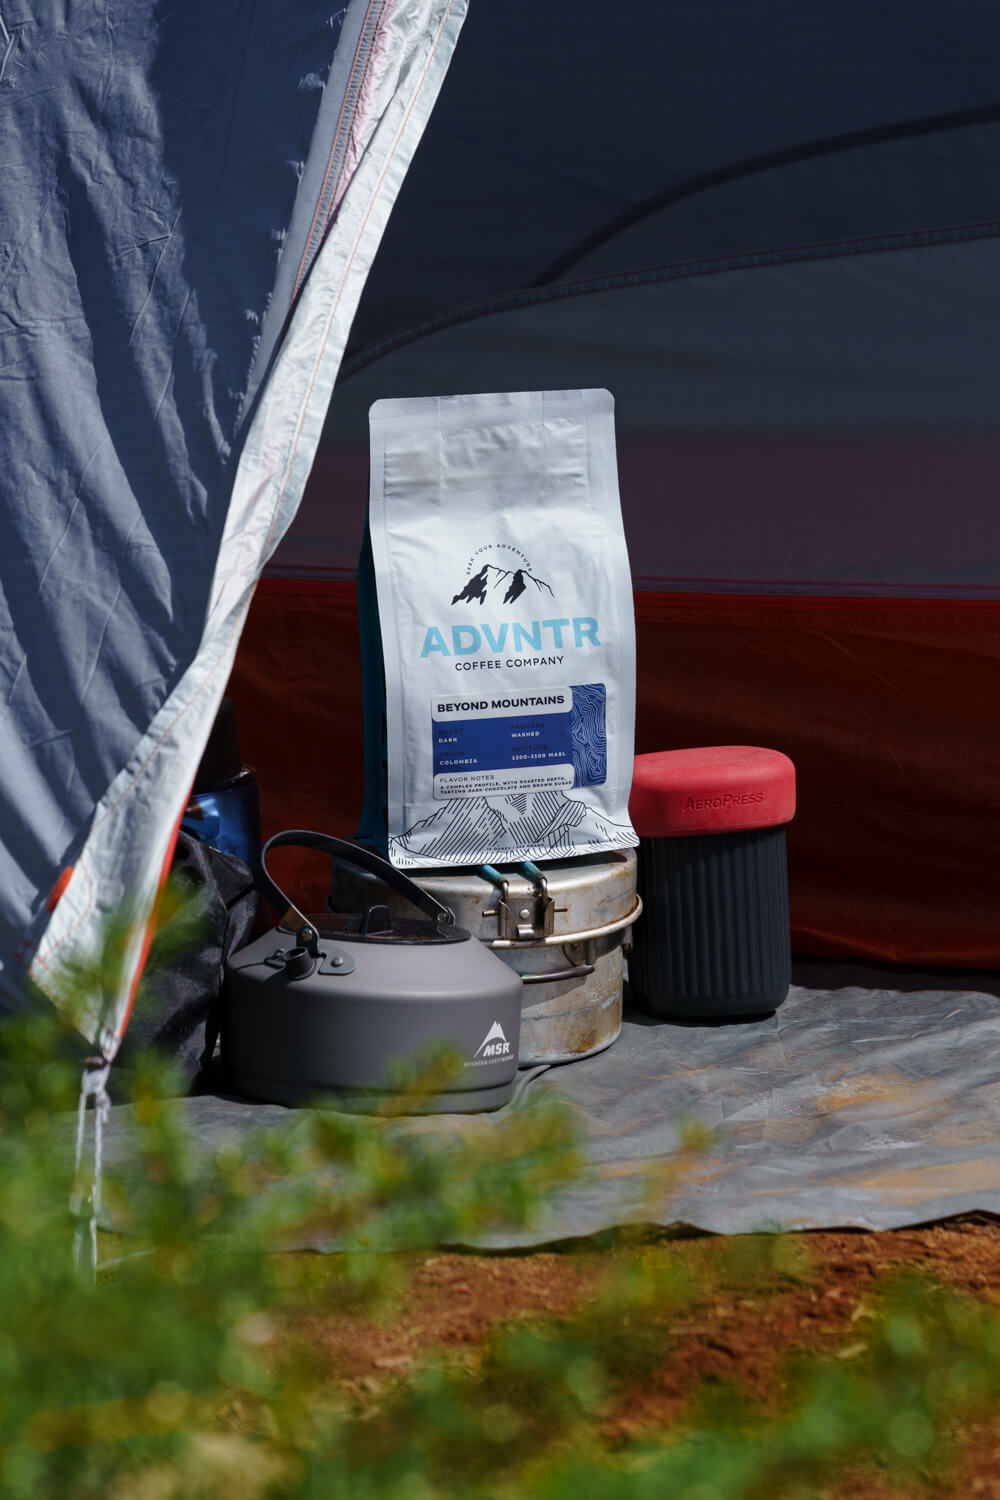 camping coffee setup with beyond mountains coffee bag aeropress msr kettle and tent